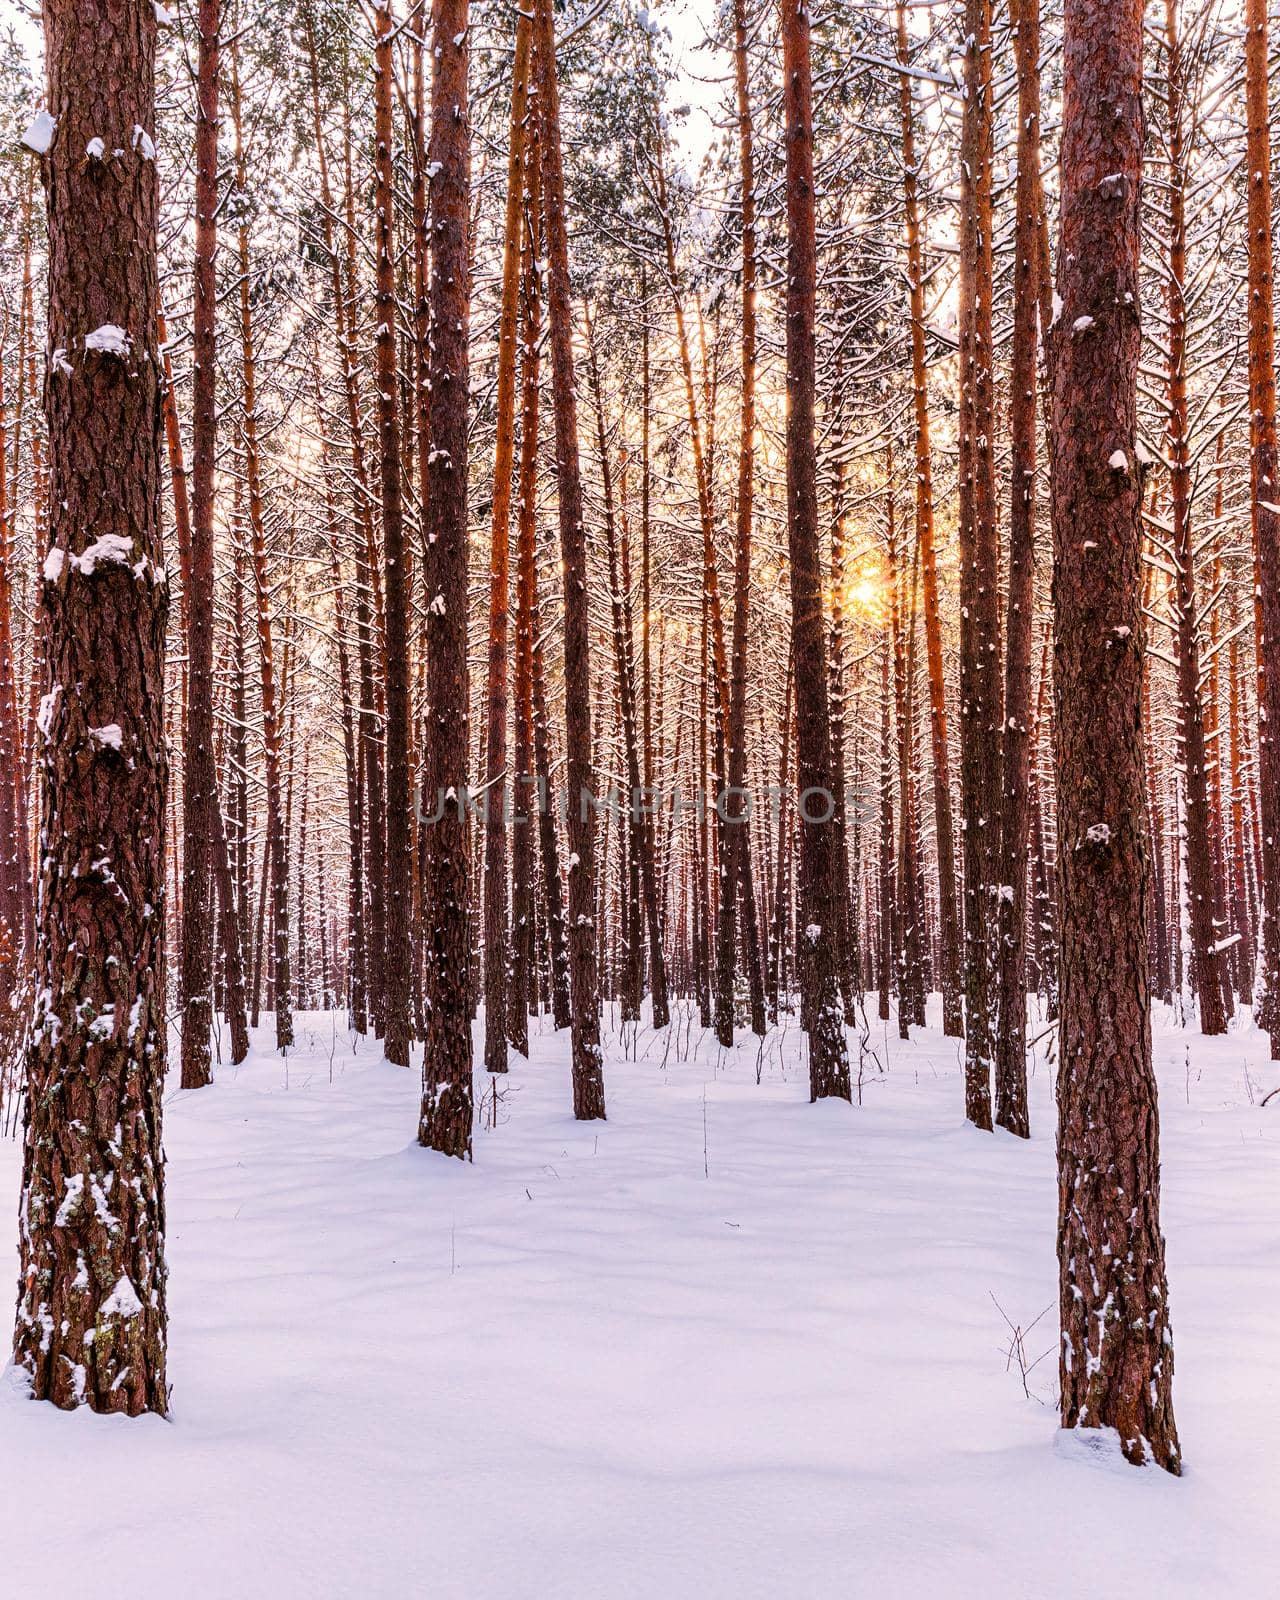 Sunset or sunrise in the winter pine forest covered with a snow. Sunbeams shining through the pine trunks.